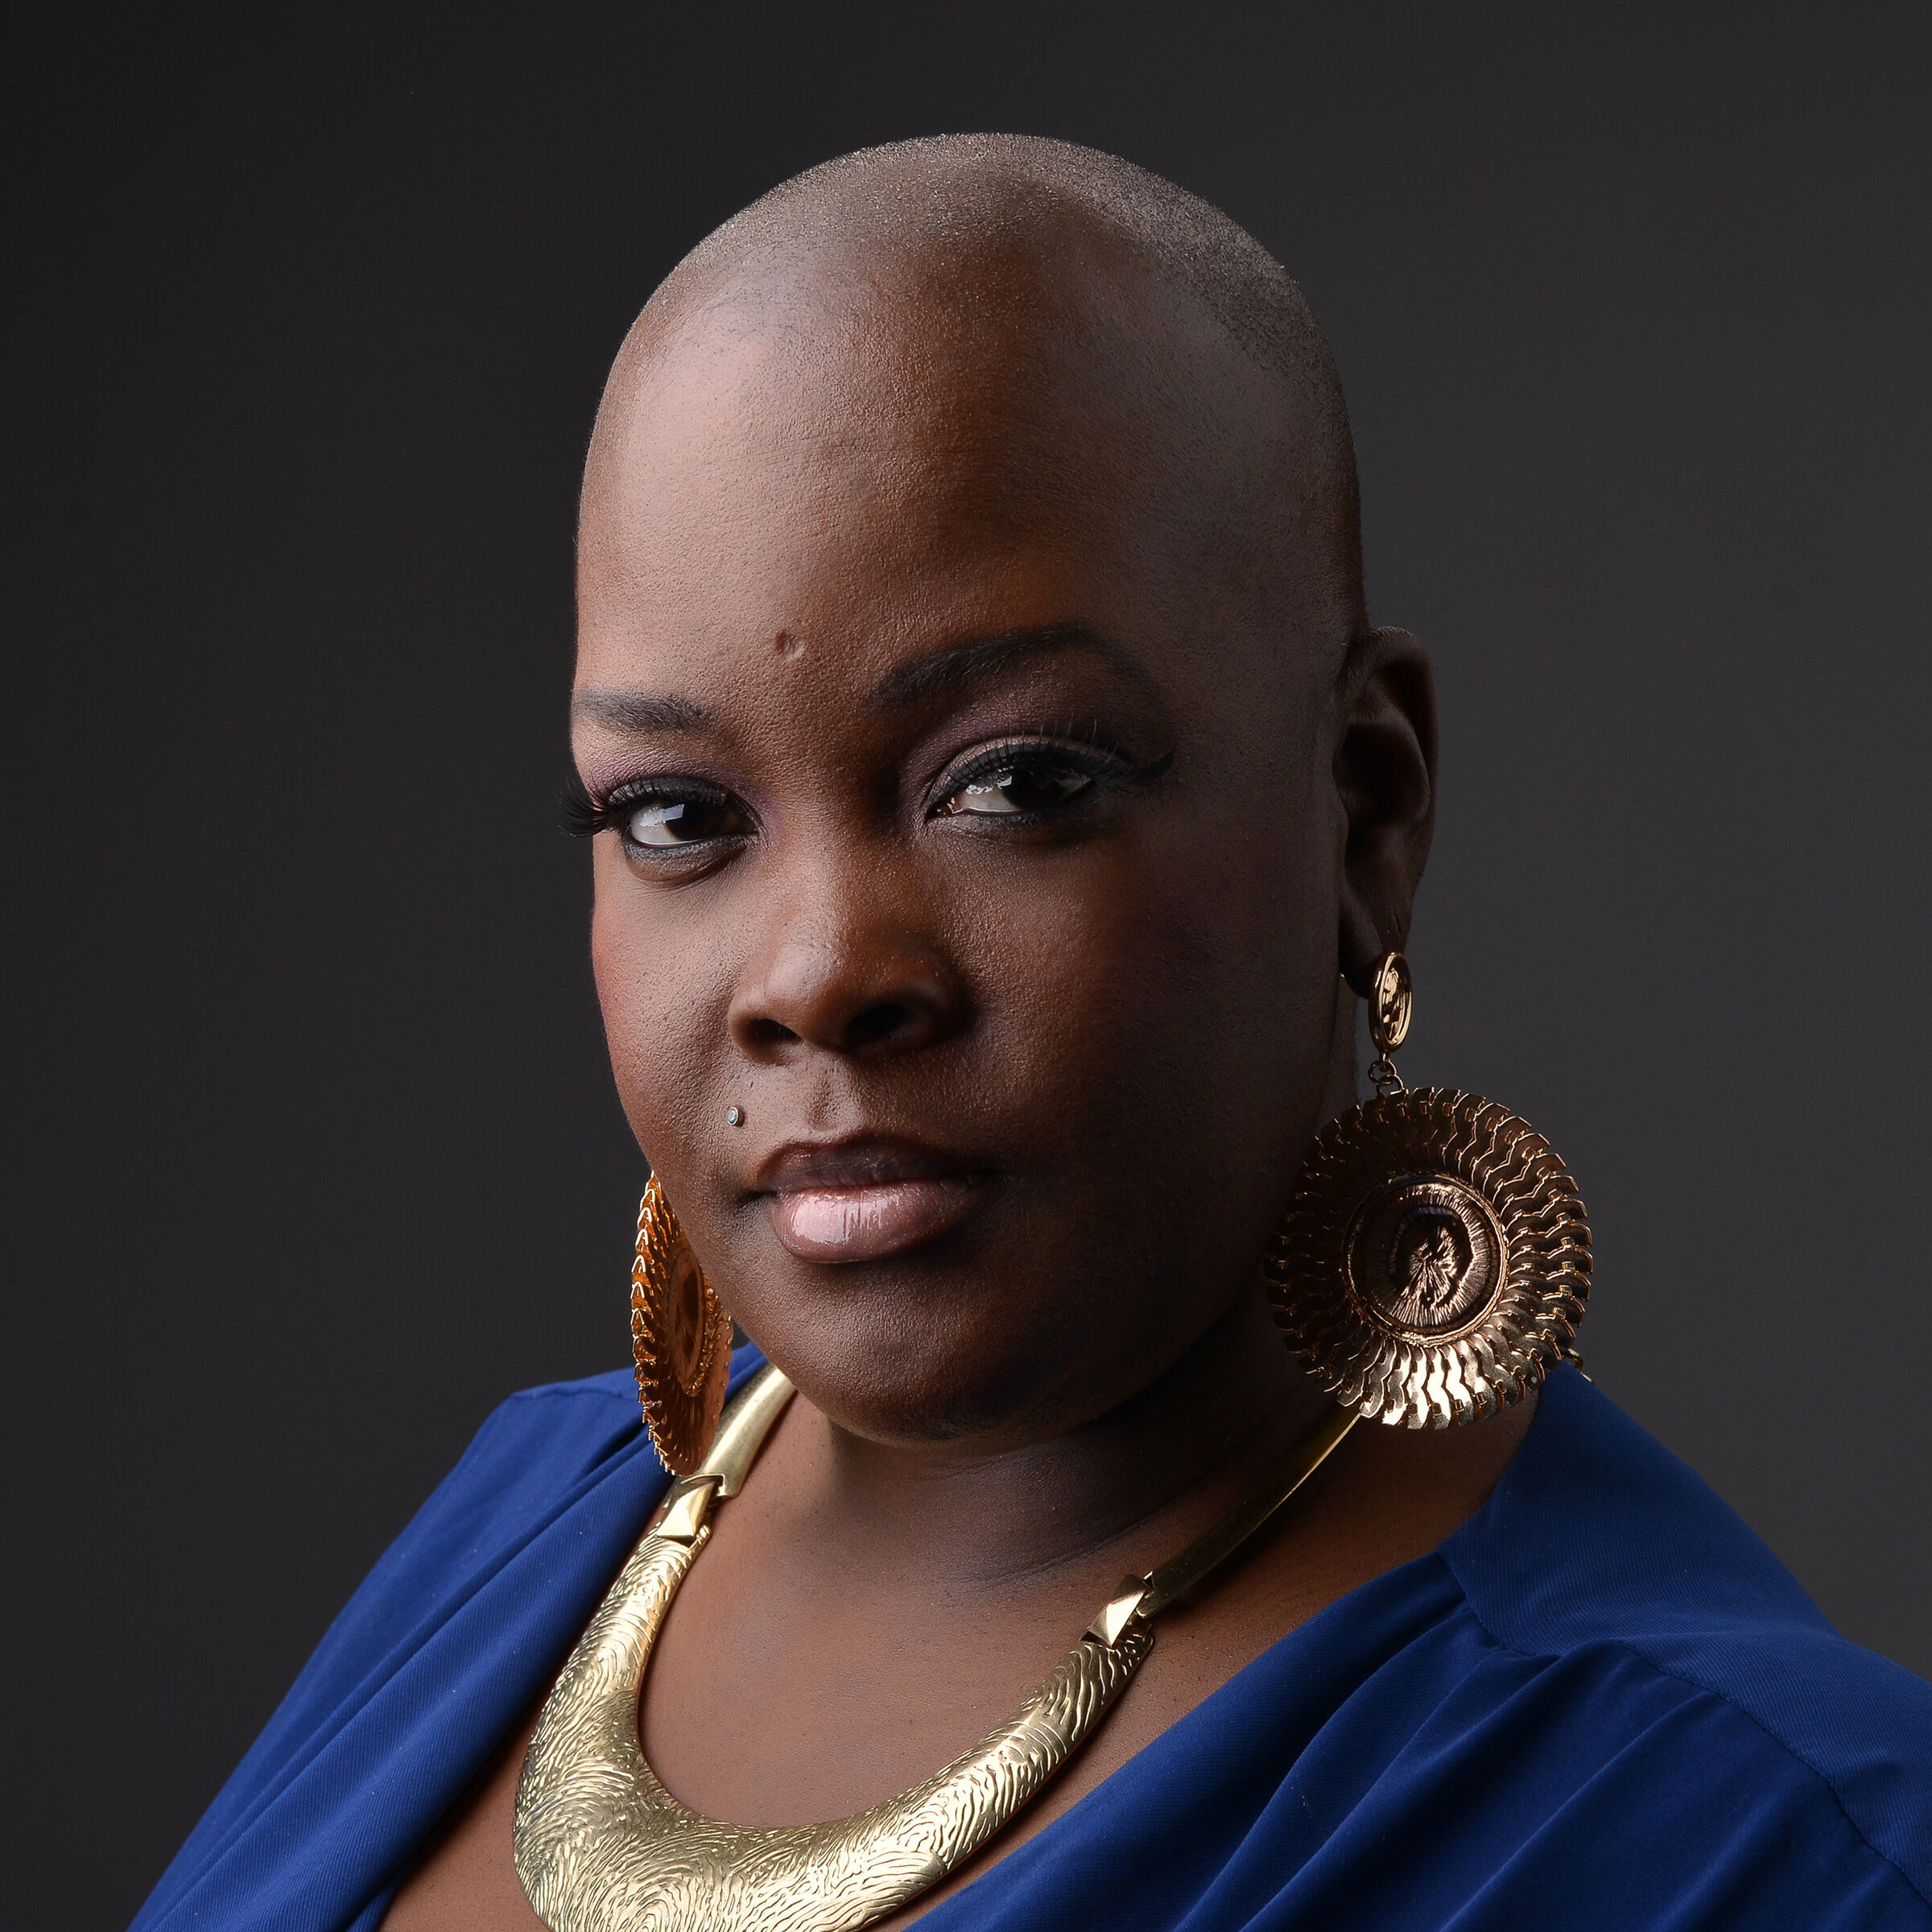 A picture of Sonya Renee Taylor